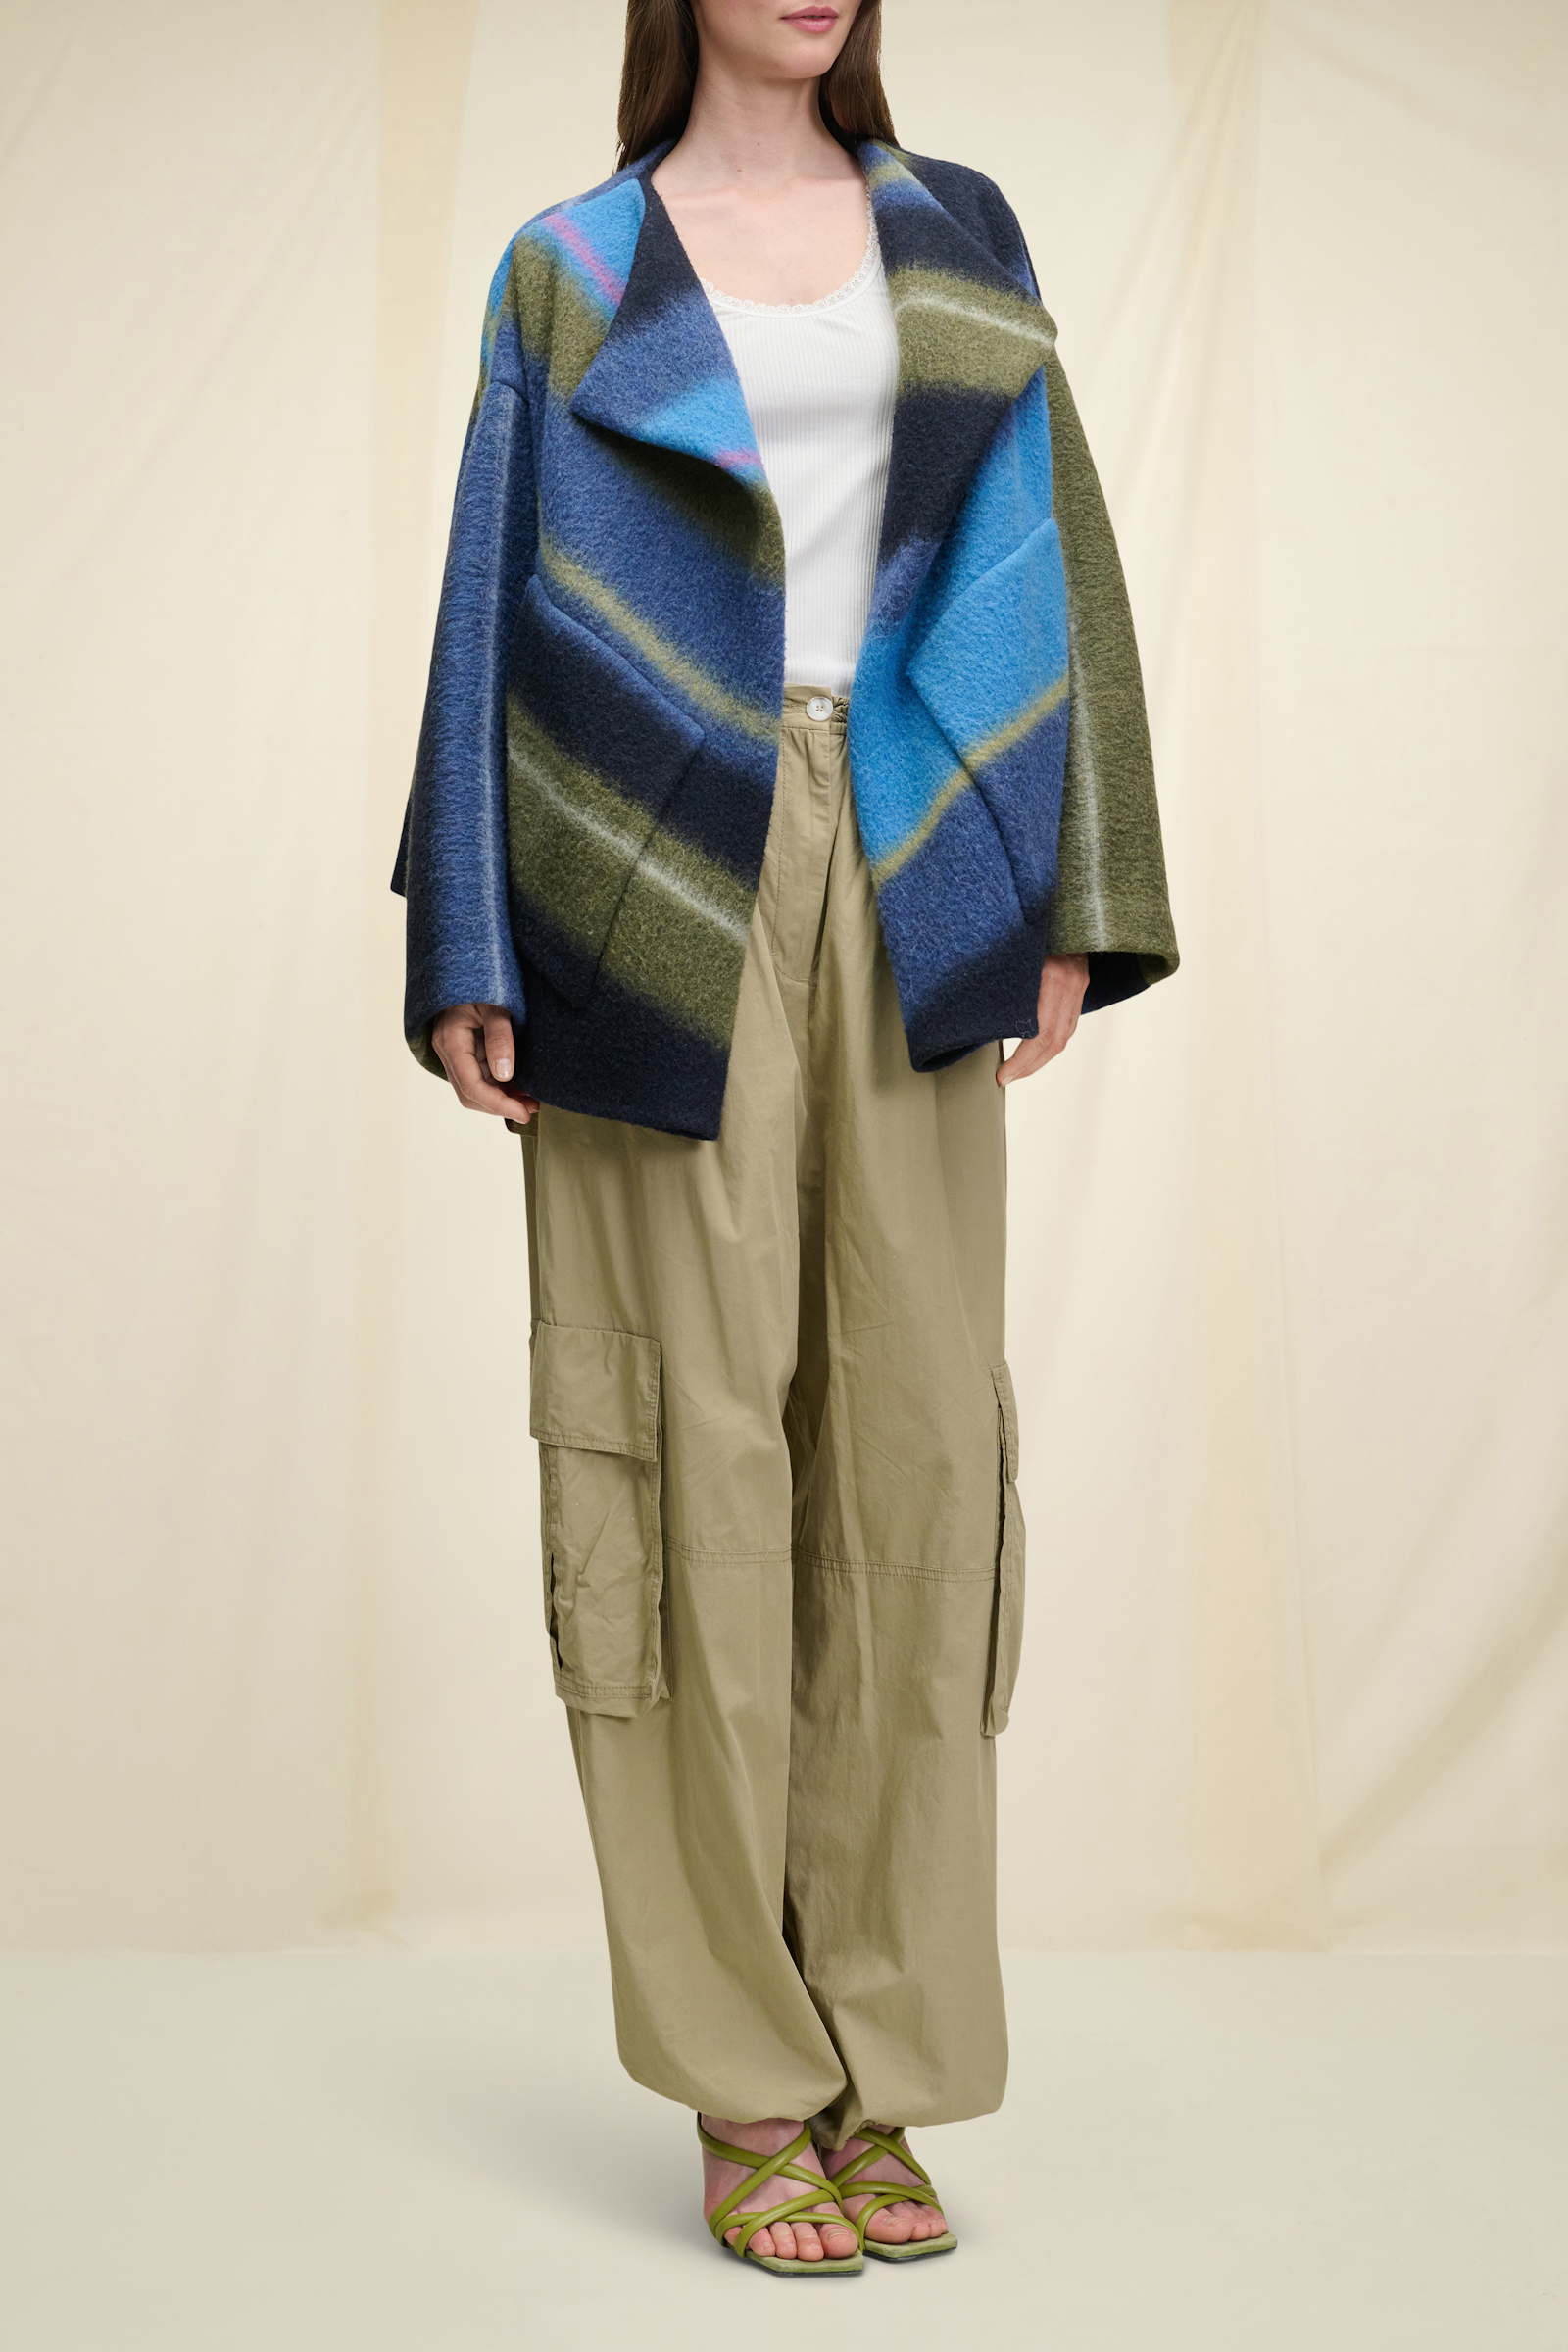 Dorothee Schumacher Cape-style jacket in a striped wool blend colorful stripes